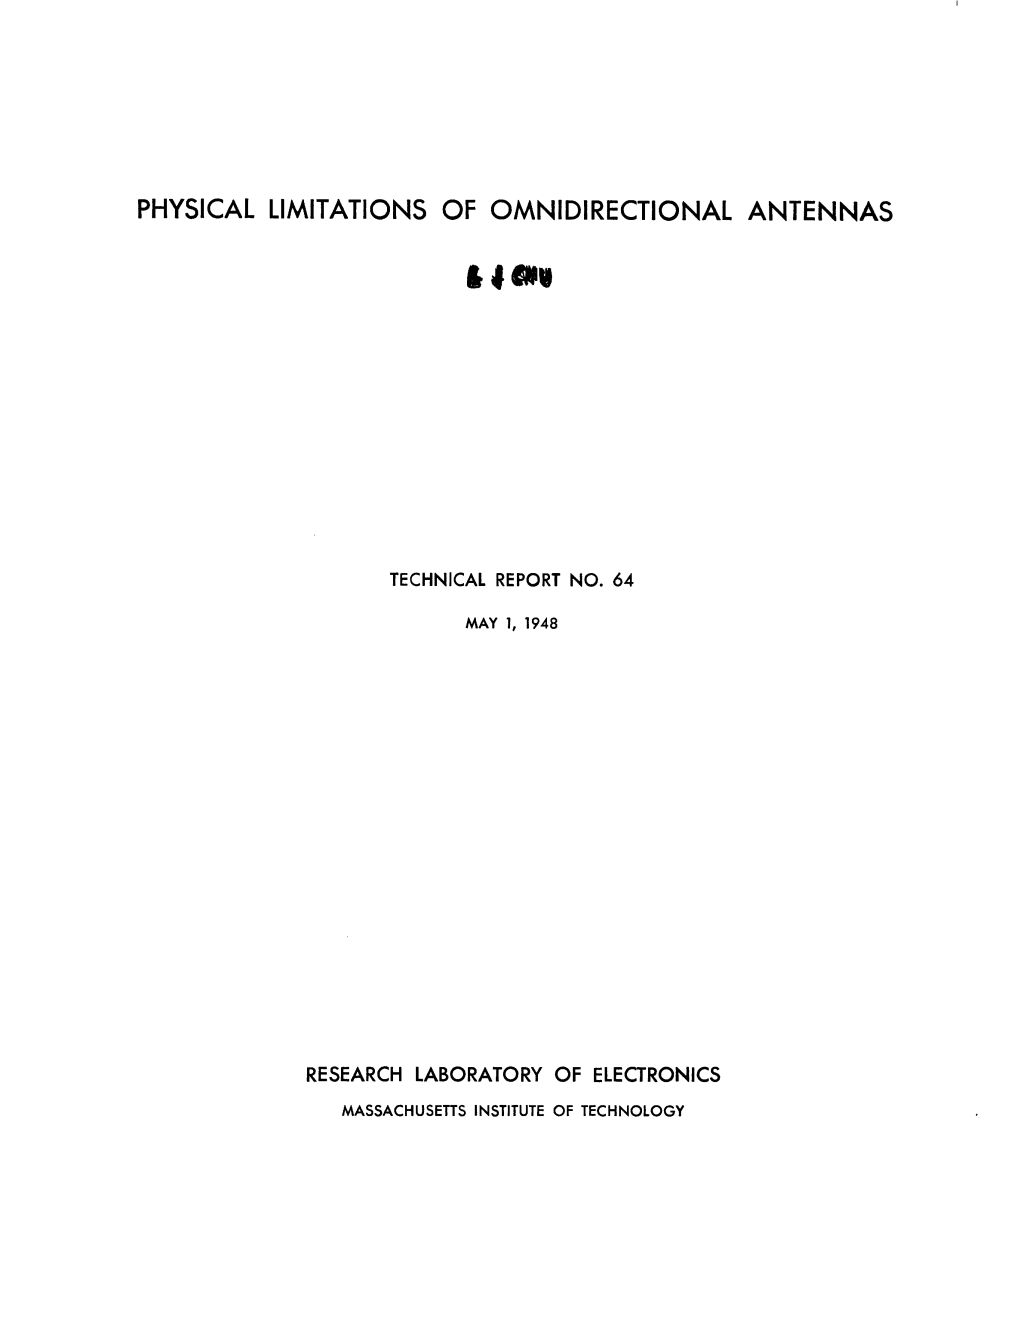 Physical Limitations of Omnidirectional Antennas